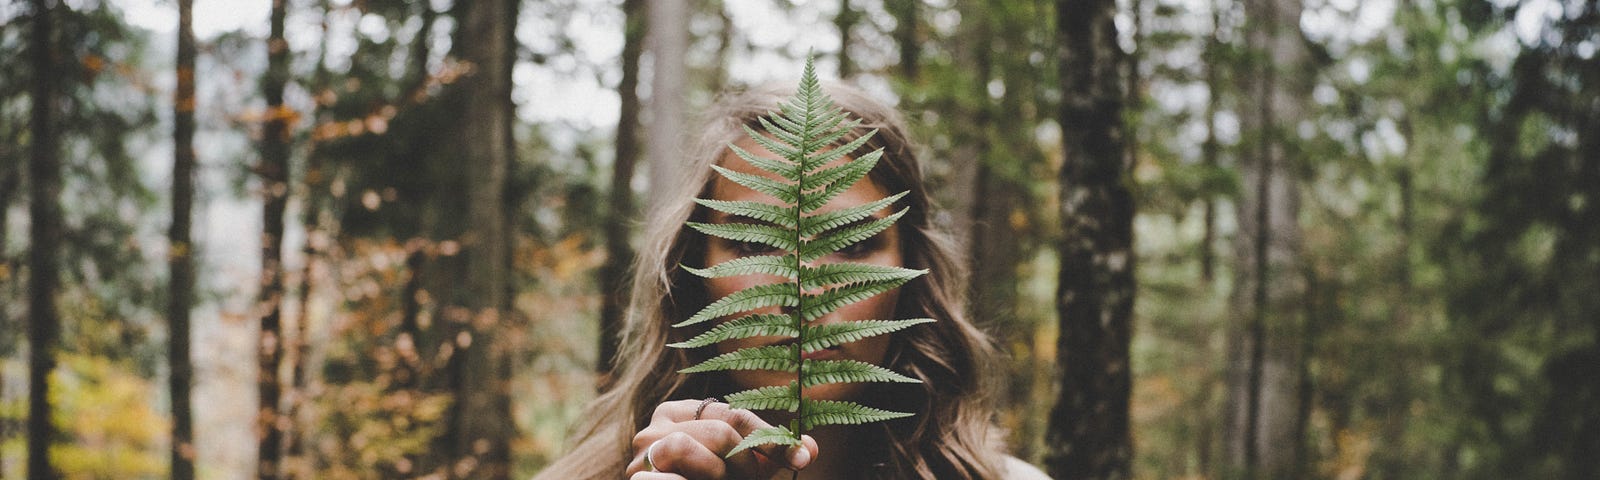 Woman standing in the woods holding a fern leave in front of their face